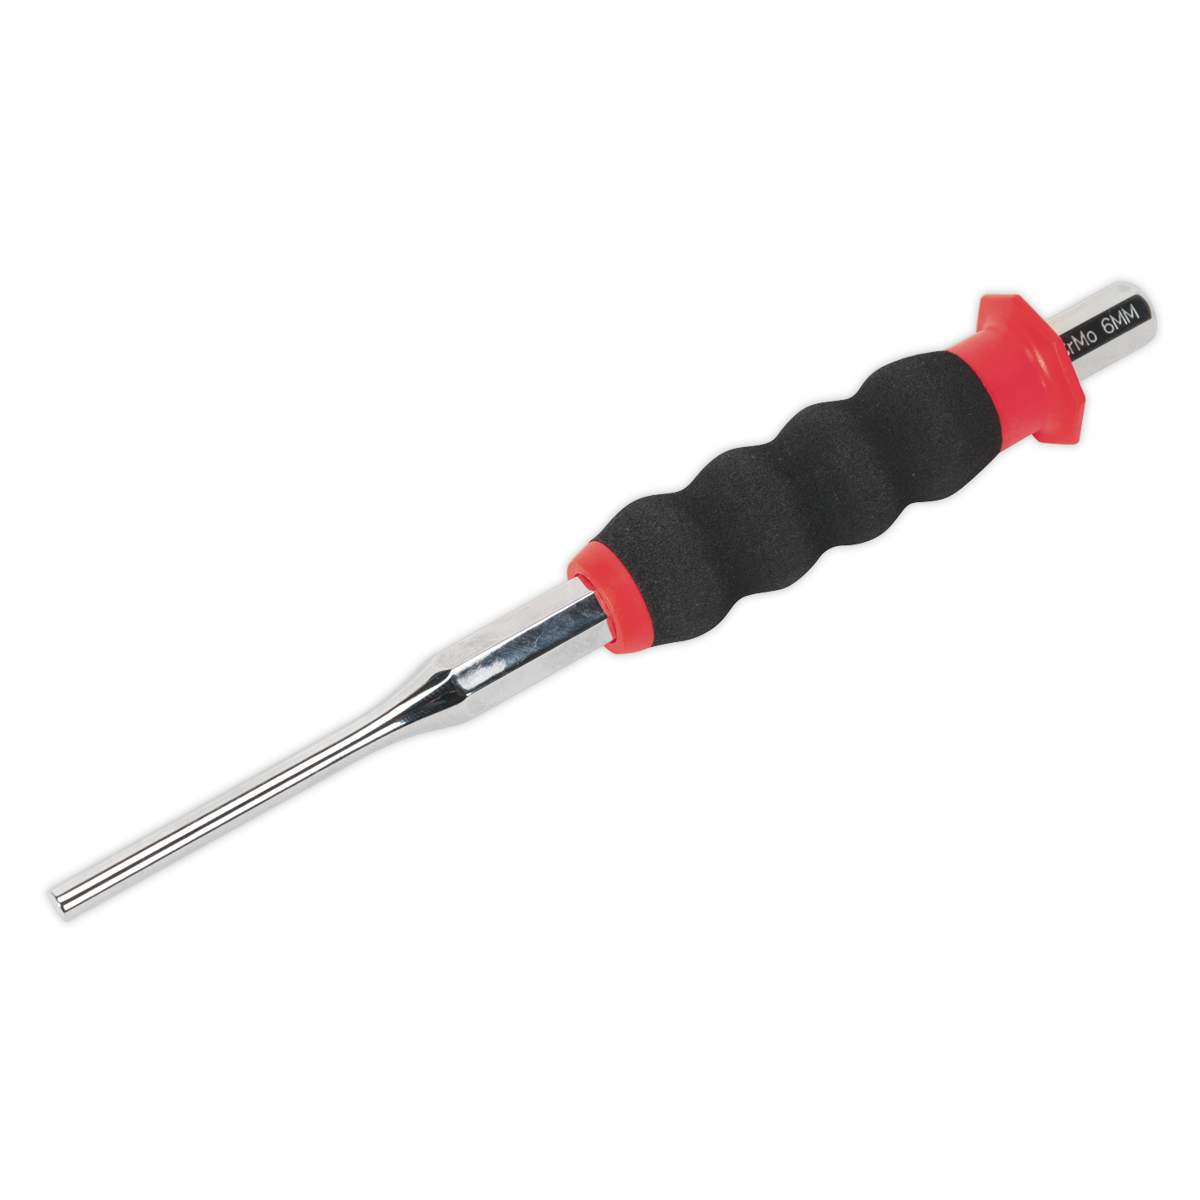 Sealey AK91316 Sheathed Parallel Pin Punch Ø6mm